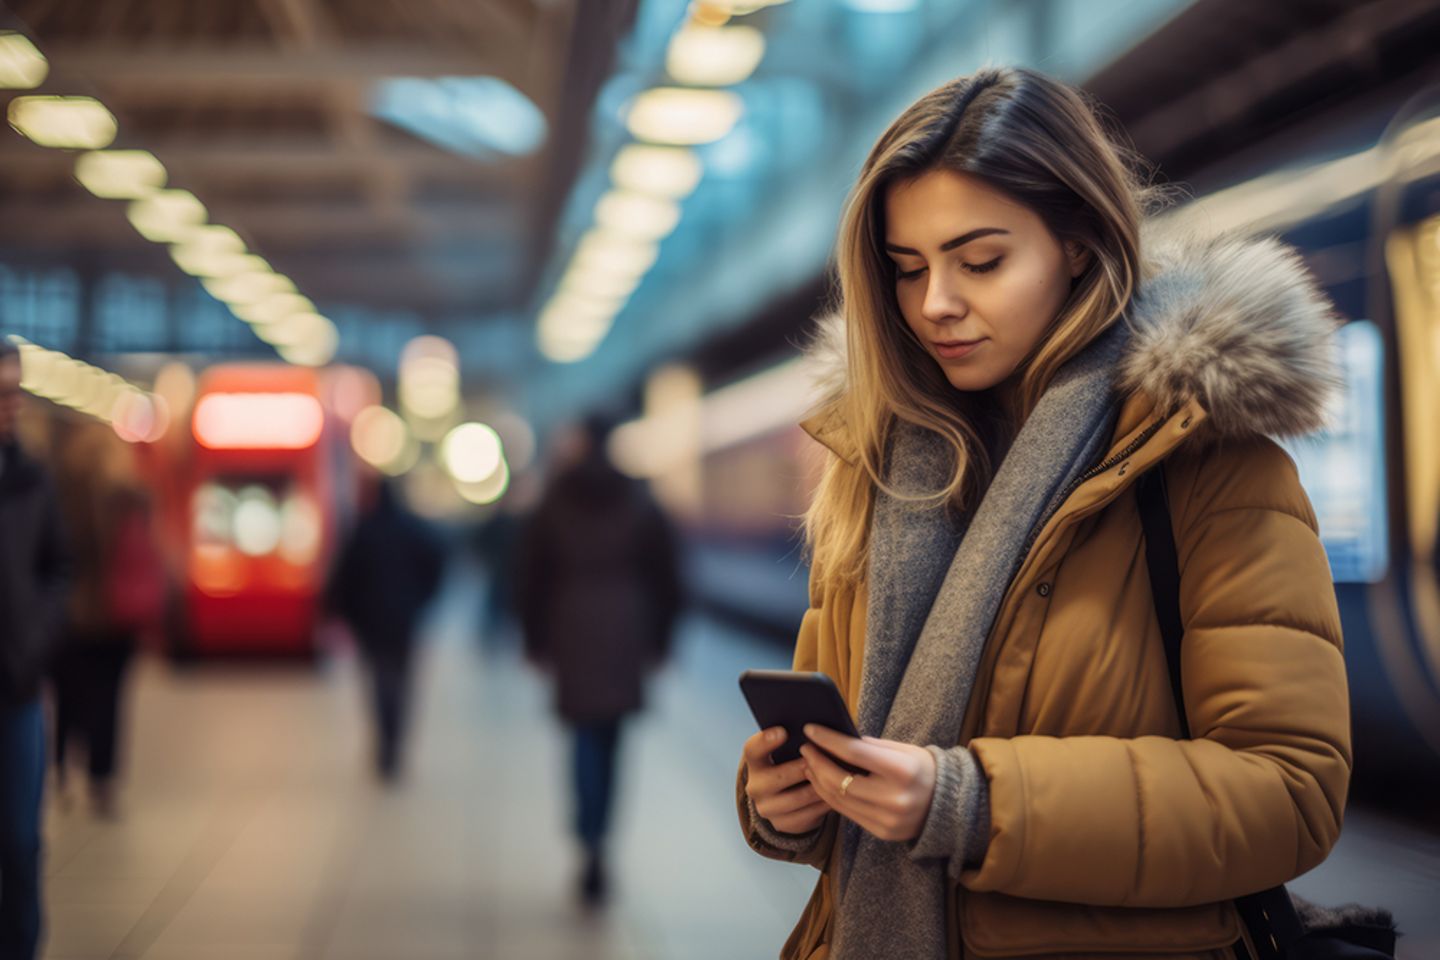  A Young woman standing on the platform of a train station consulting the mobile phone